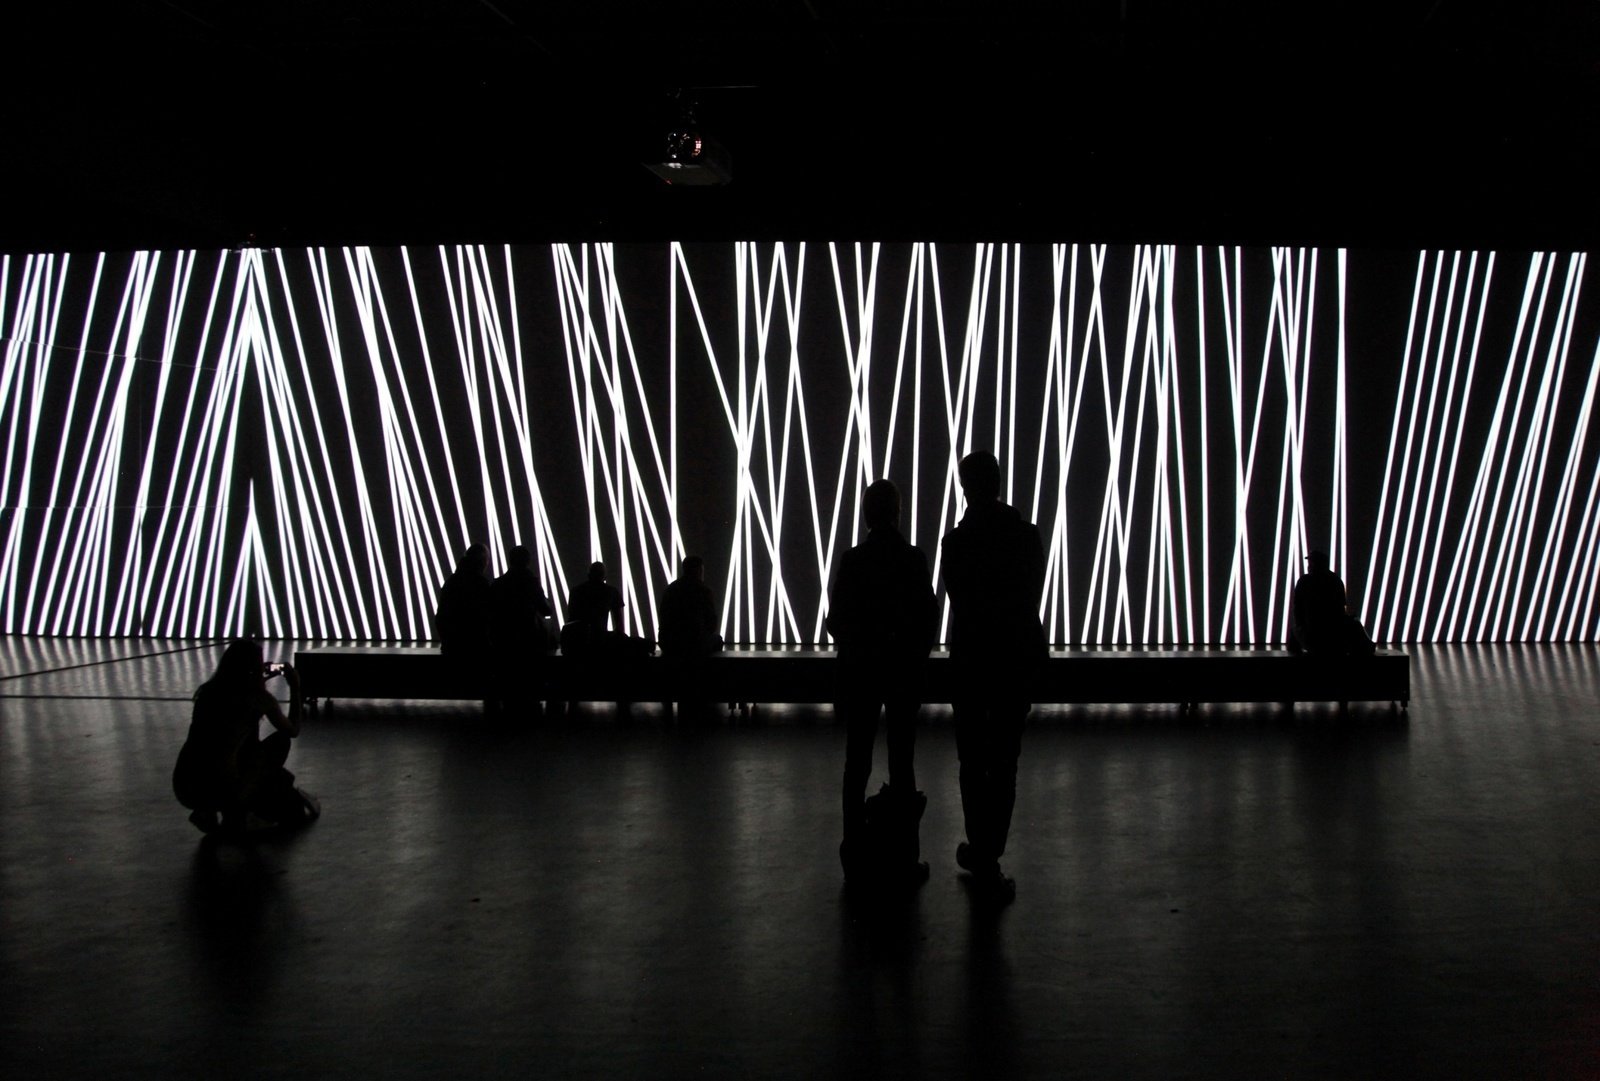 Carsten Nicolai, Unidisplay, Hangar Bicocca, Milano. 2012. Real-time projection, large-scale screen, mirrors dimensions variable